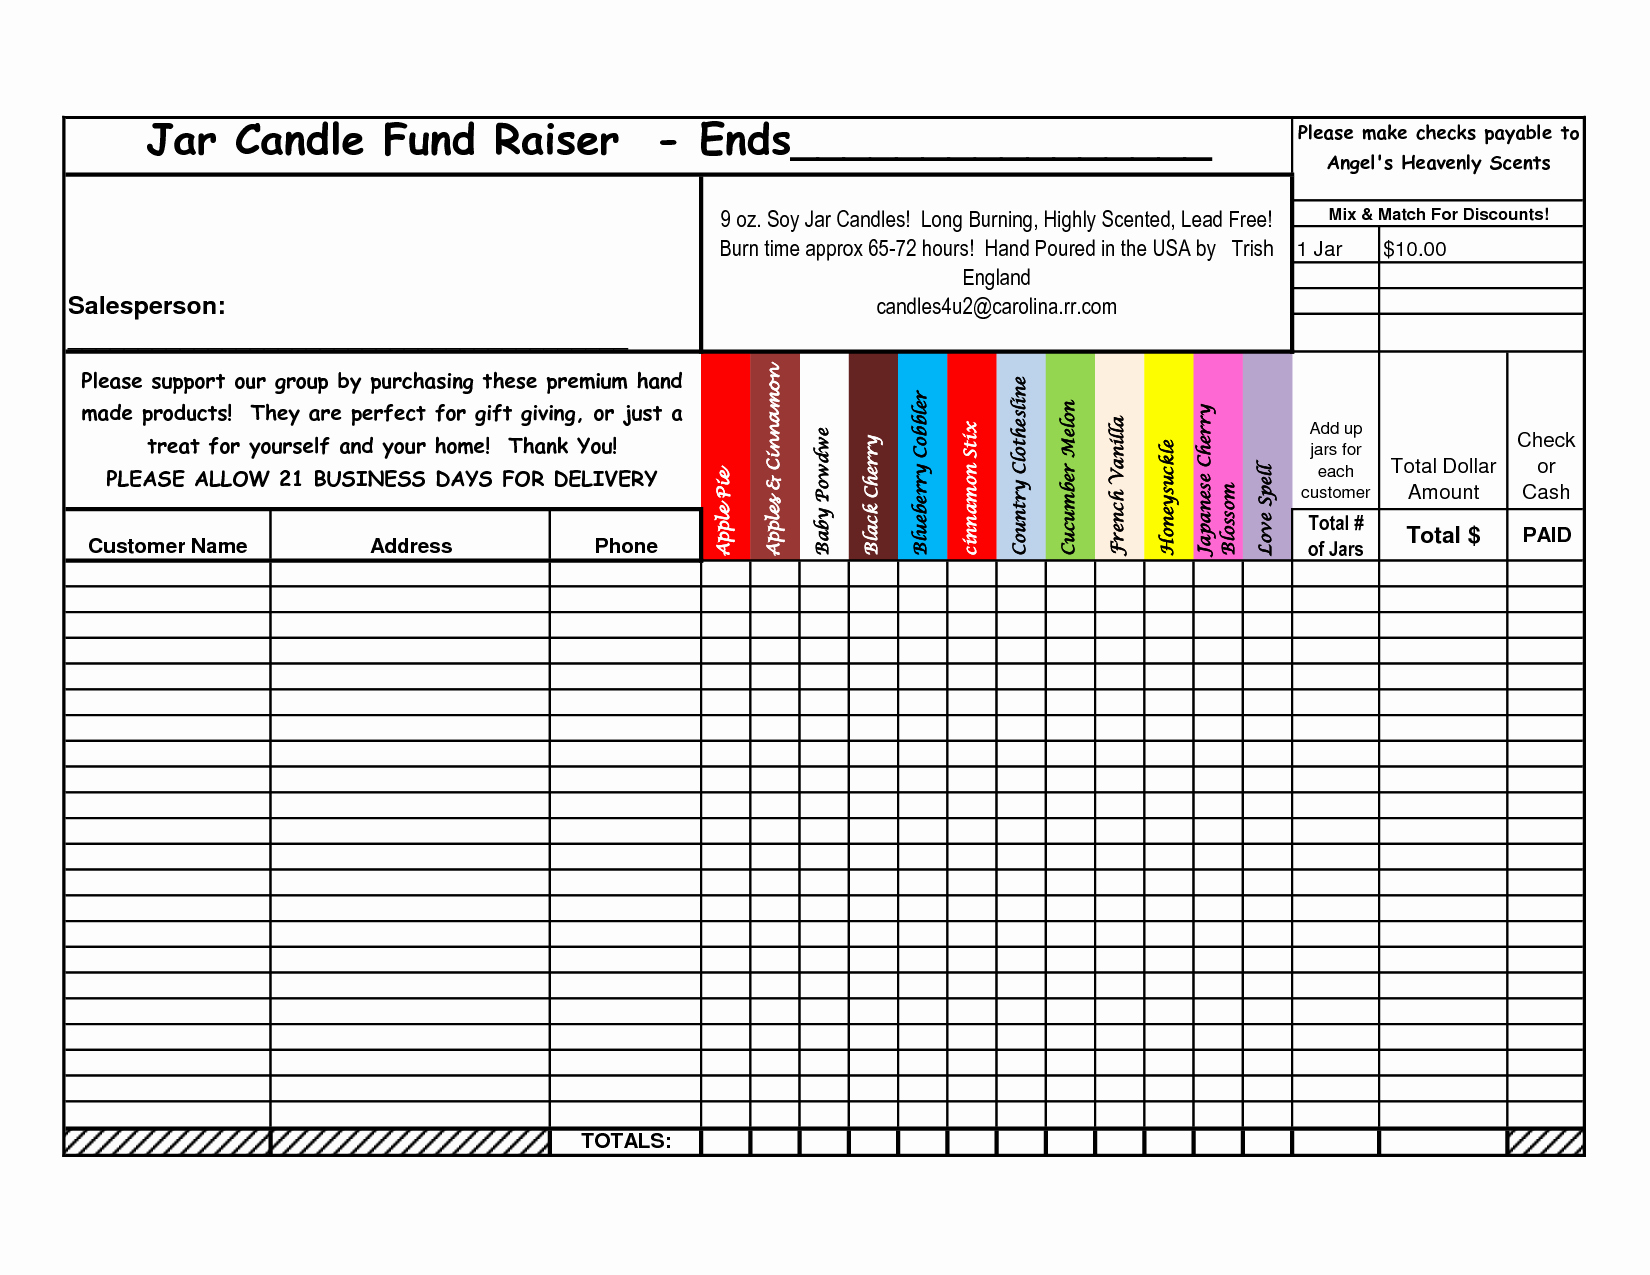 Fundraiser form Template Free Elegant Fundraiser order form Template Excel the Ultimate